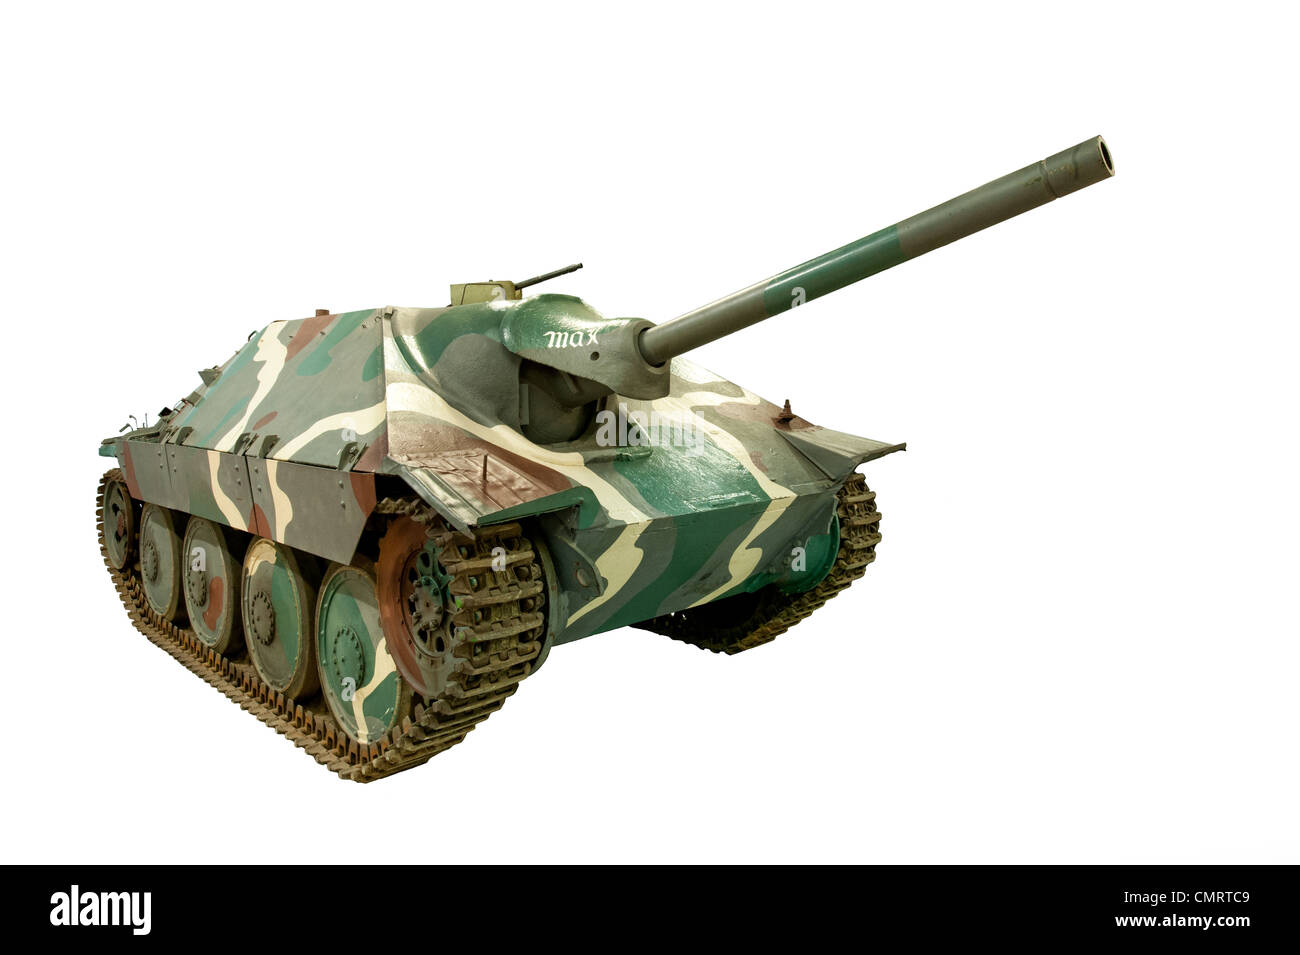 A cut out of a Hetzer Jagdpanzer 38(f) Tank Destroyer used by Nazi German forces during WW2 Stock Photo